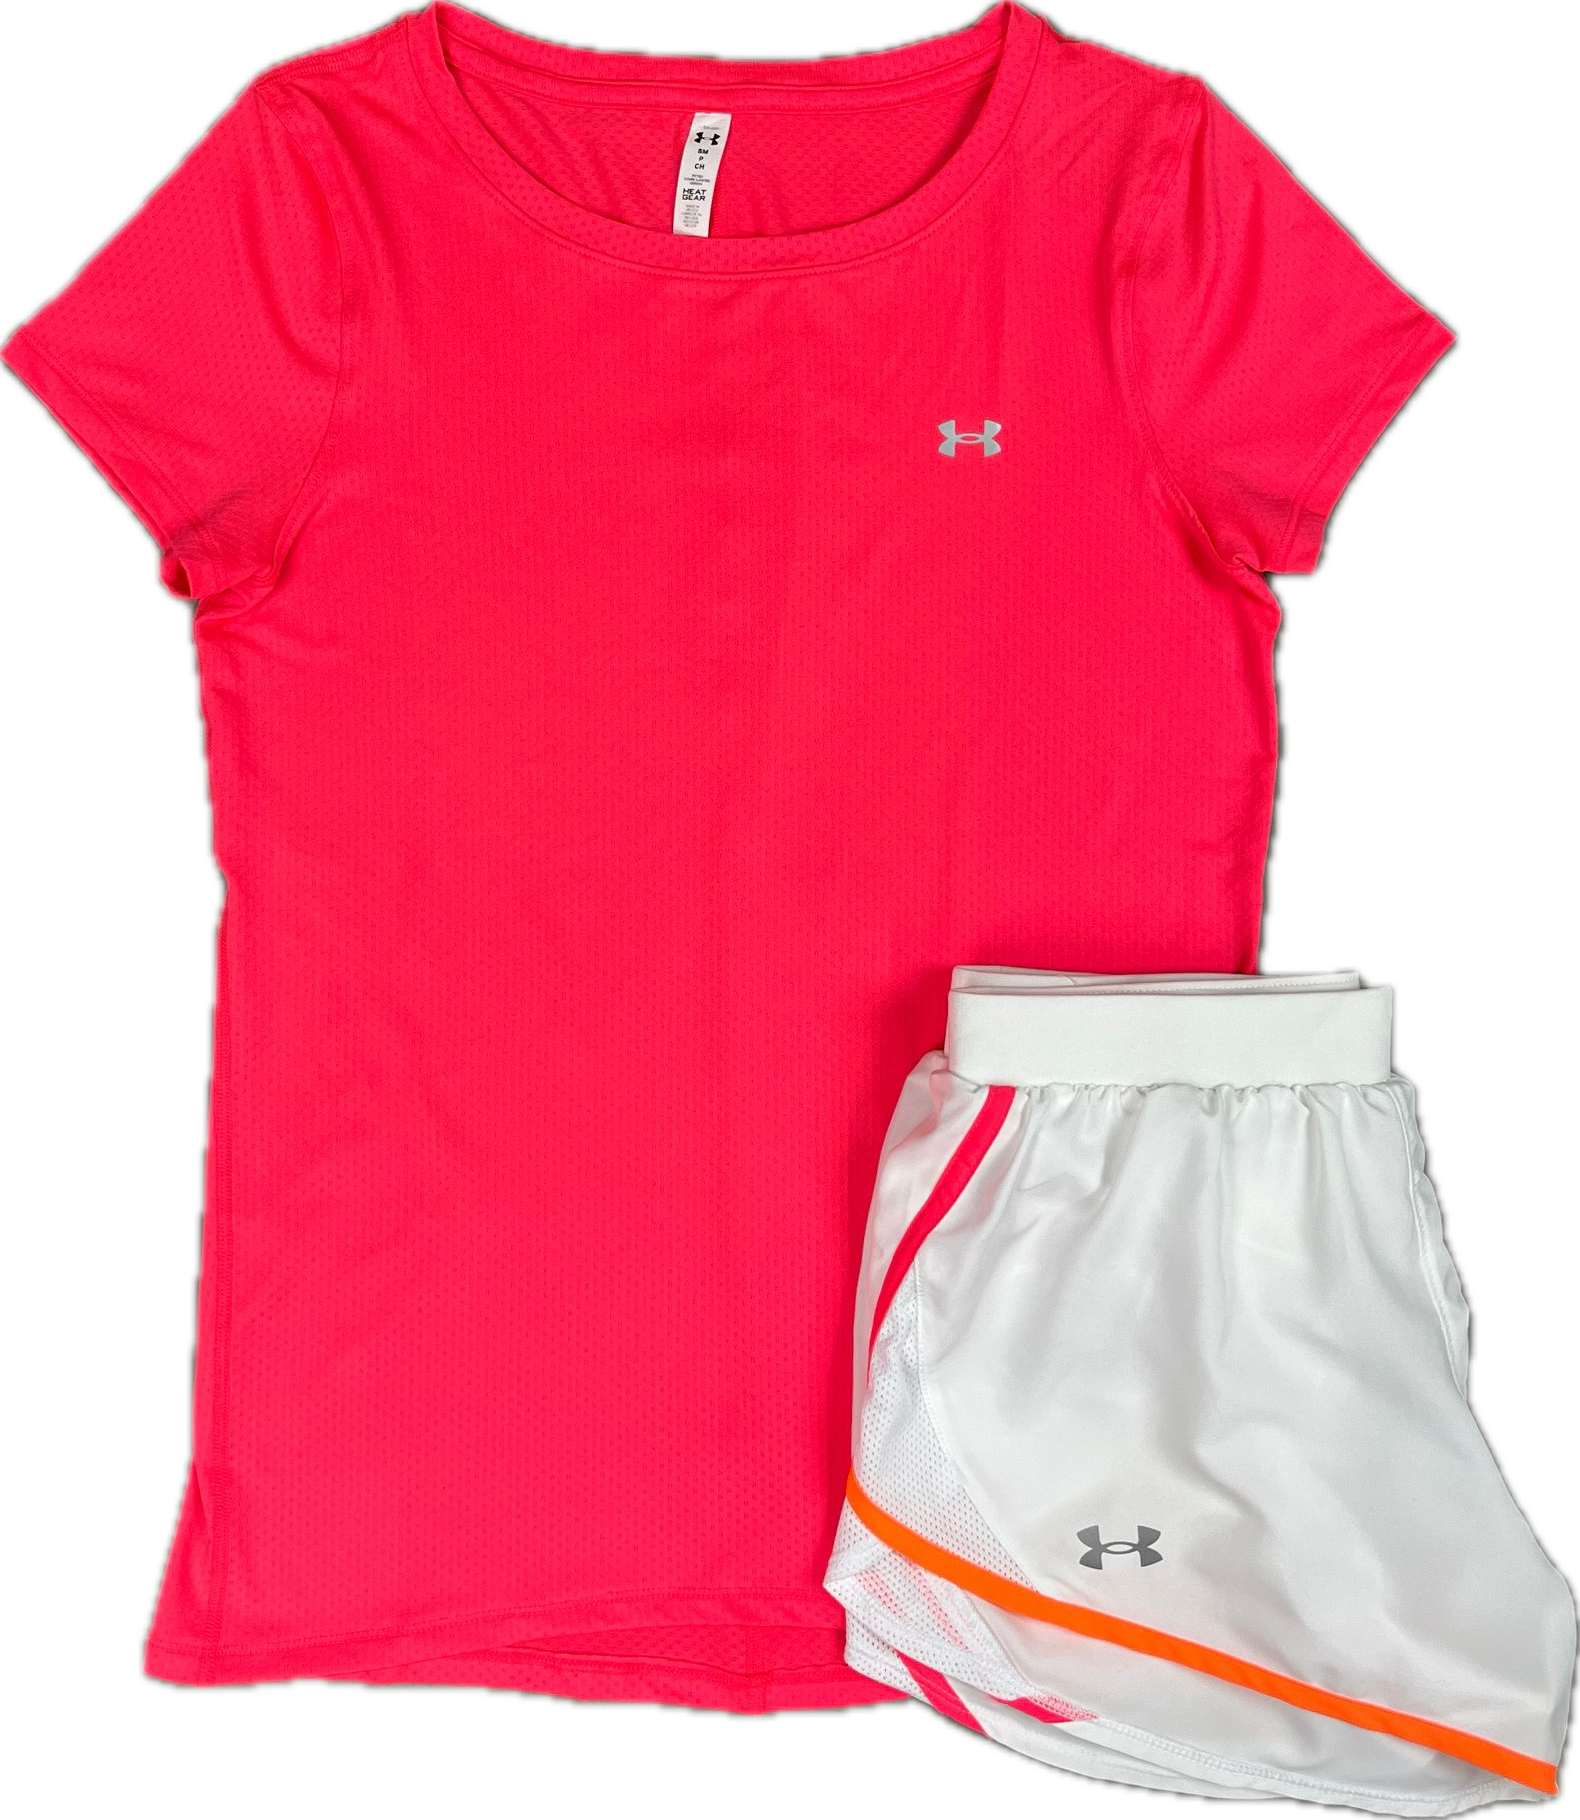 UNDER ARMOUR WOMEN'S T SHIRT FLY SHORTS SET - PINK/WHITE